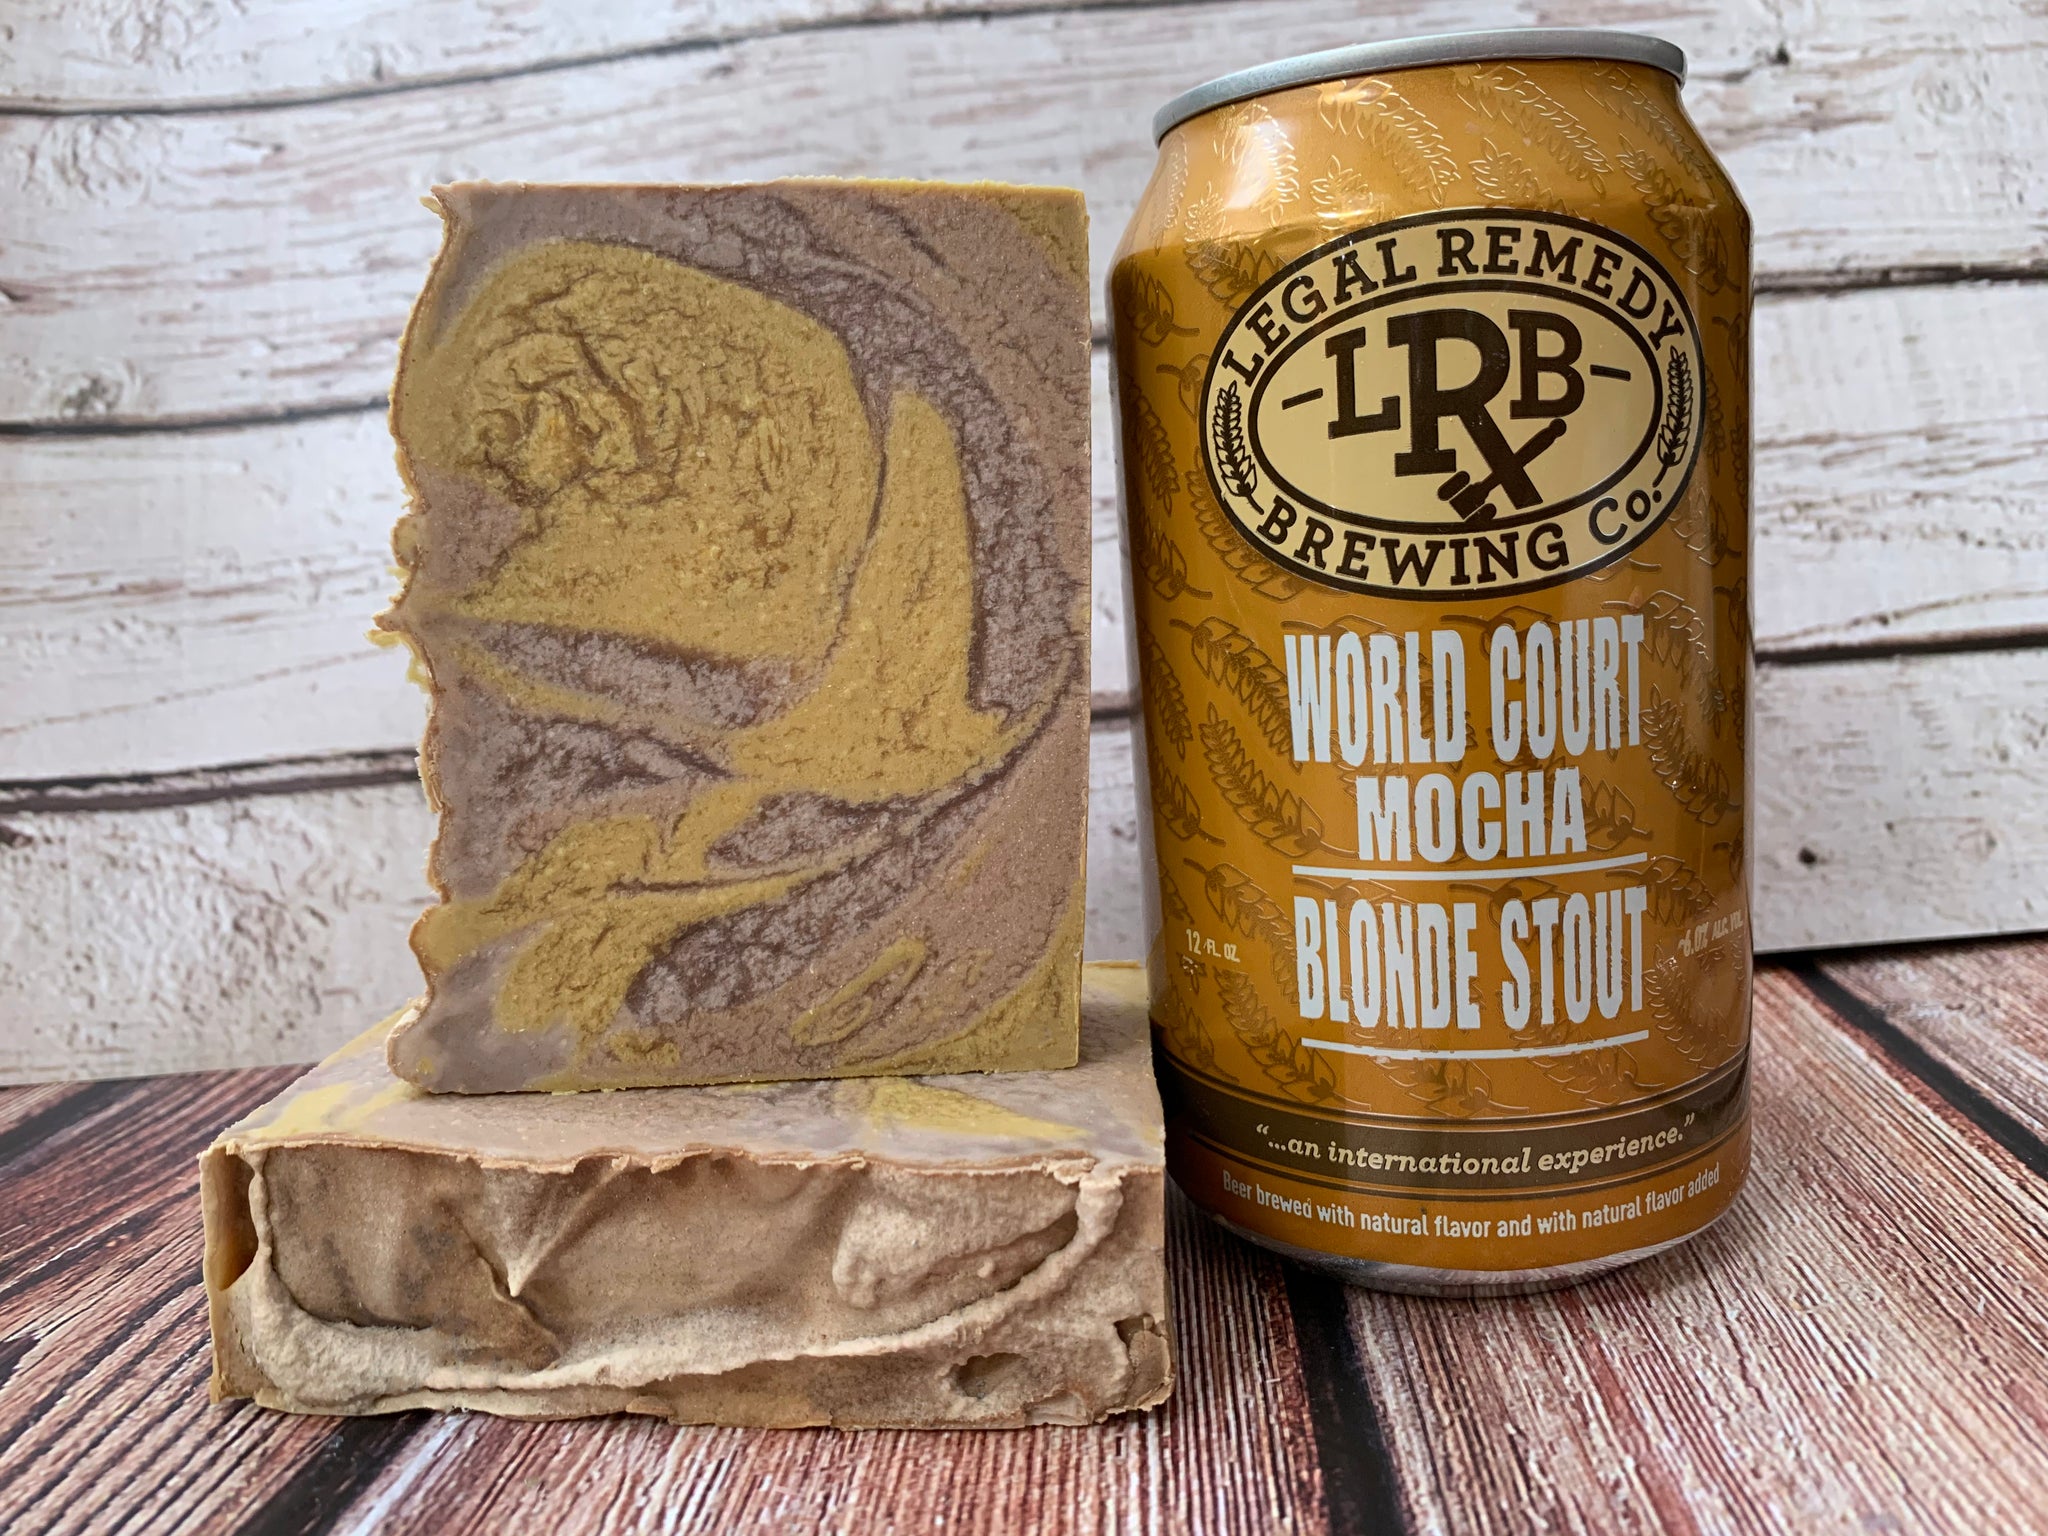 coffee craft beer soap made with world court mocha blonde stout from legal remedy brewing co. rock hill South Carolina craft brewery spunkndisorderly